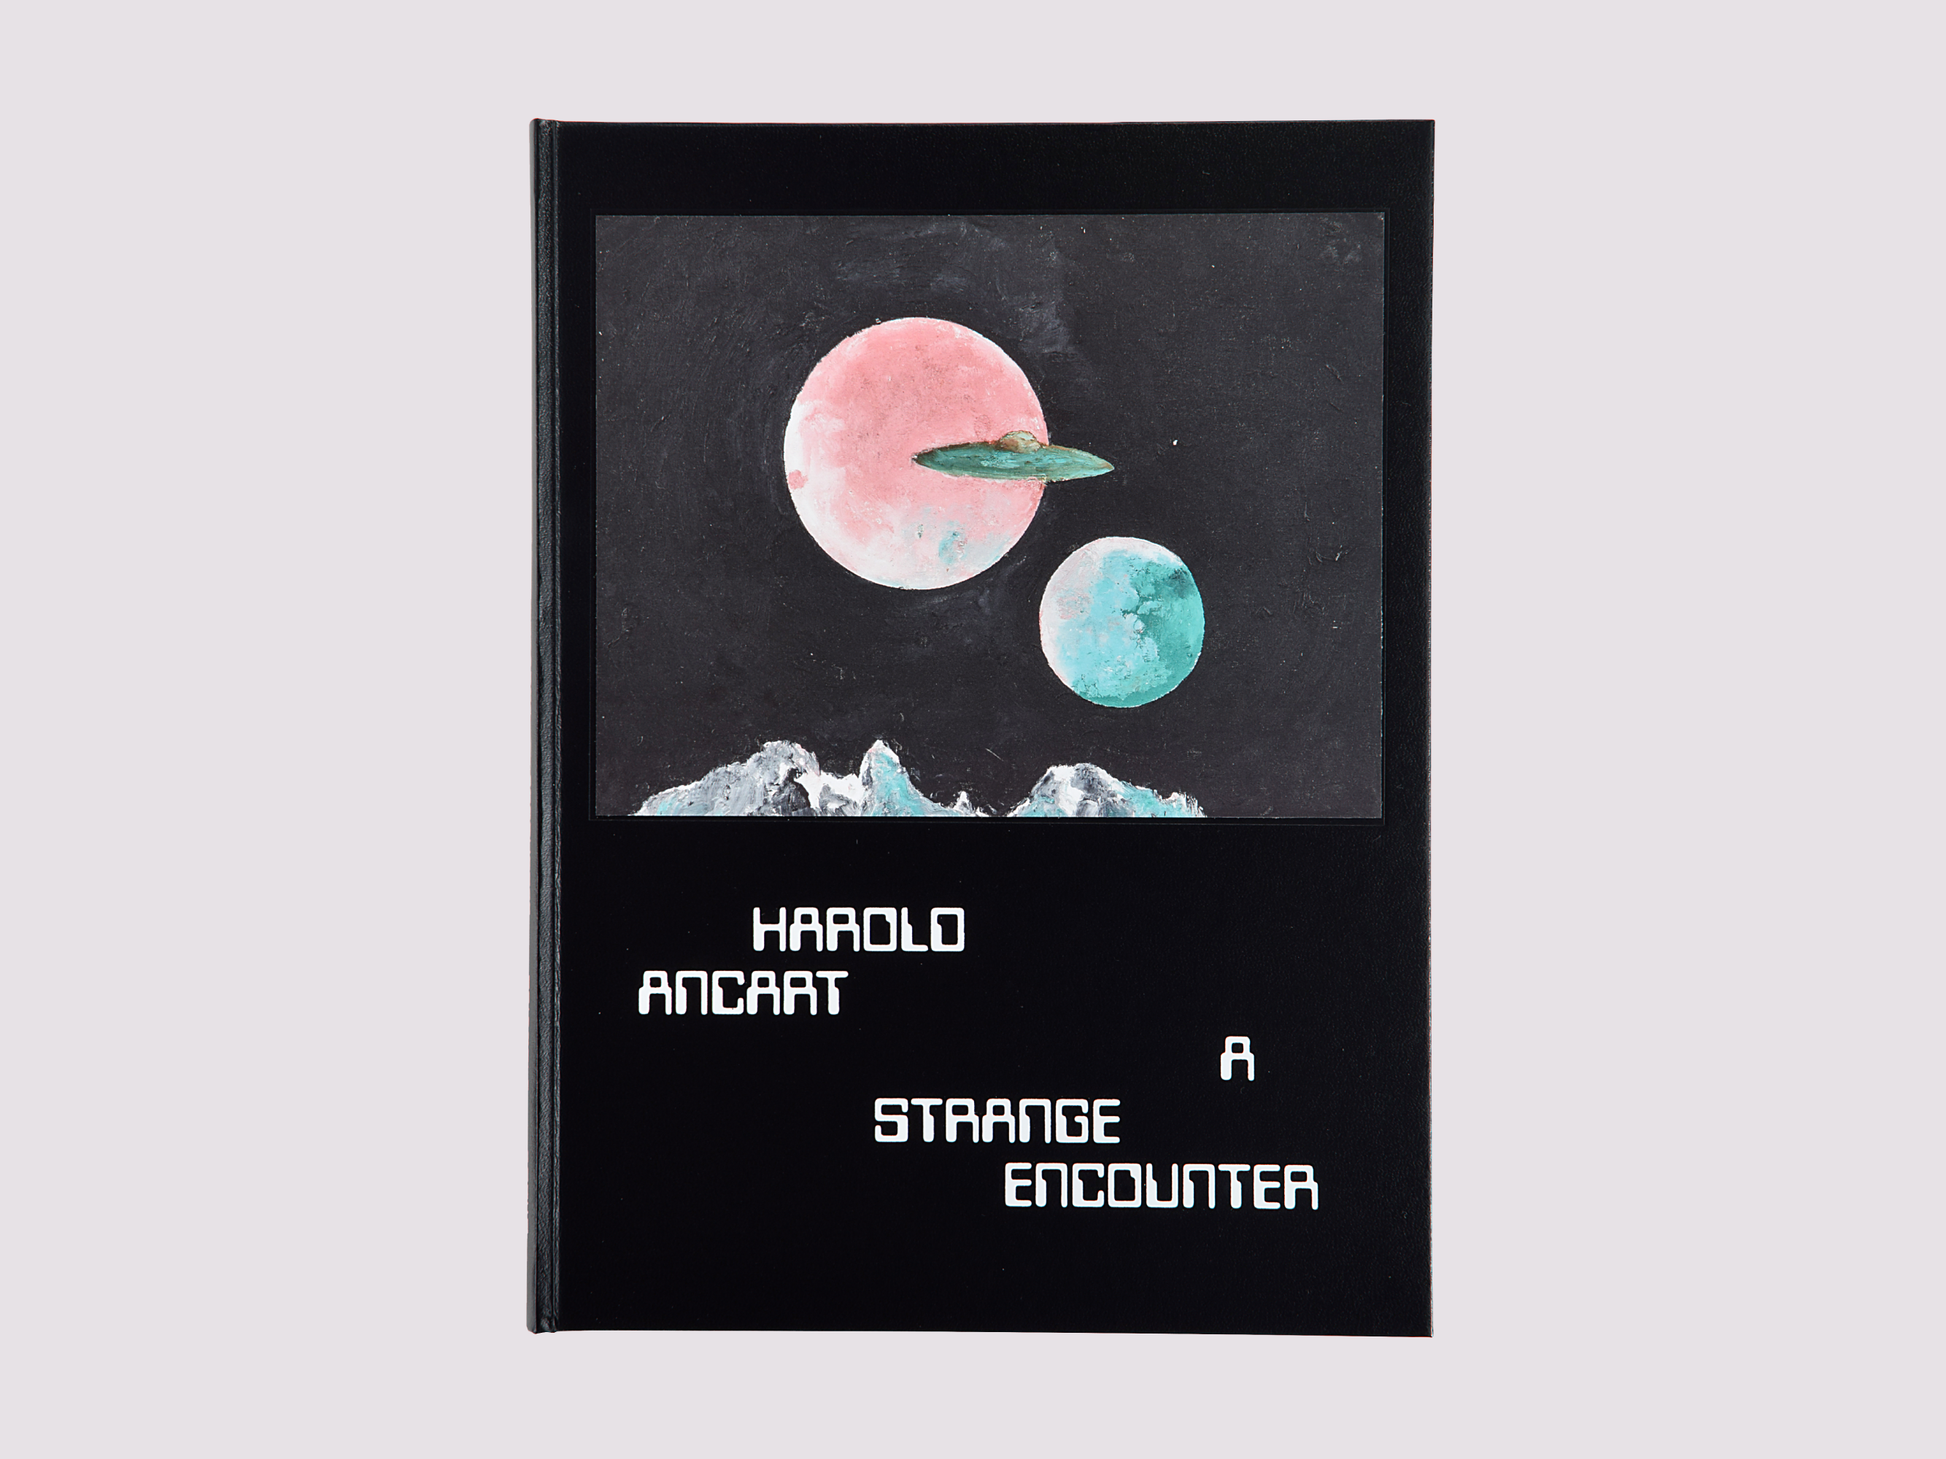 A Strange Encounter/Harold Ancart published by Triangle Books